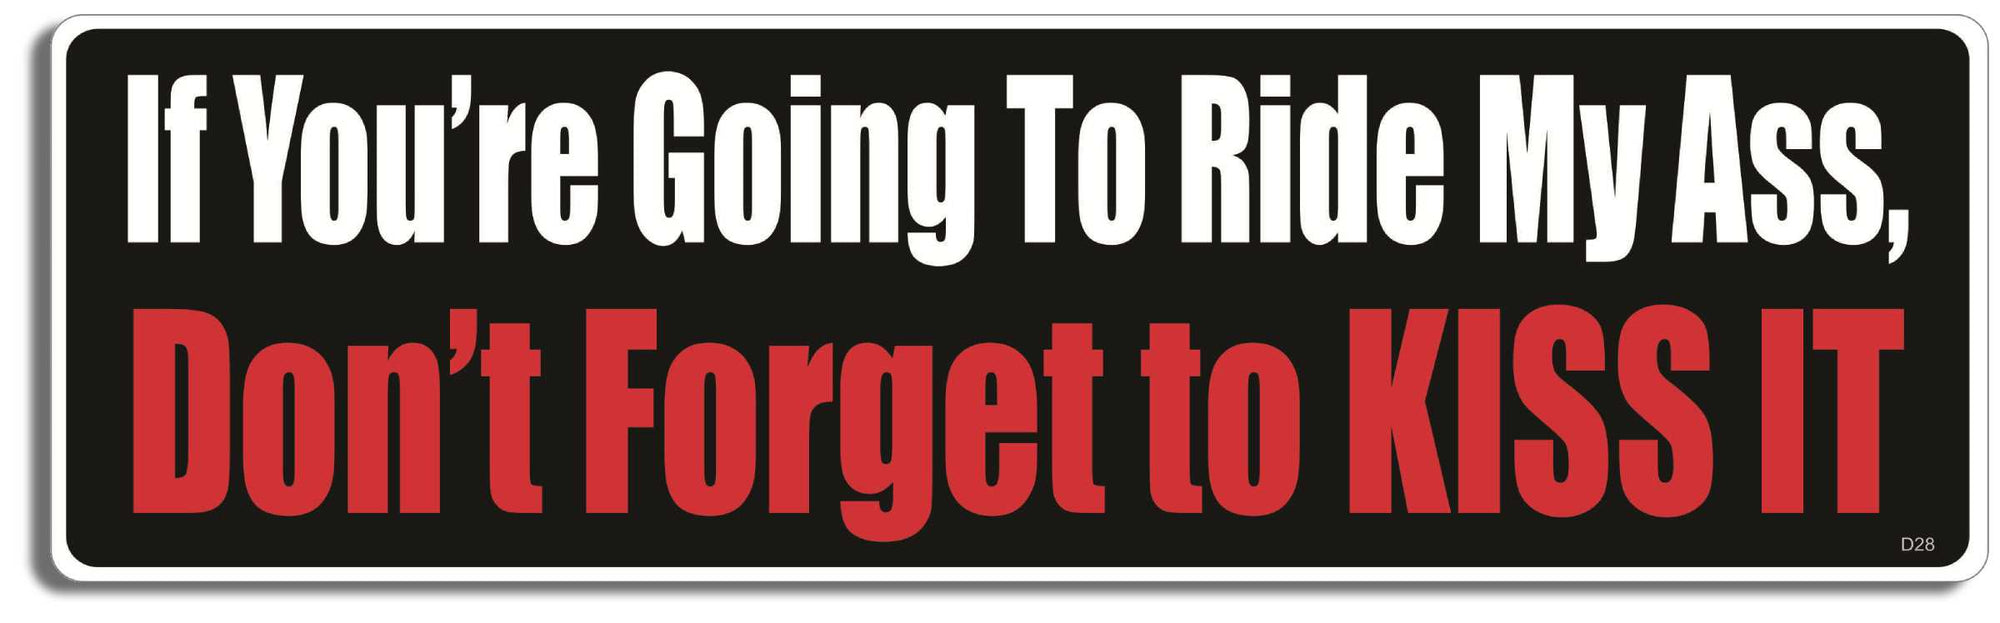 If your going to ride my ass, don't forget to kiss it - 3" x 10" Bumper Sticker--Car Magnet- -  Decal Bumper Sticker-funny Bumper Sticker Car Magnet If your going to ride my ass, don't-  Decal for carsdrive safely, Driving, Funny, safe driving, tailgaters, tailgating